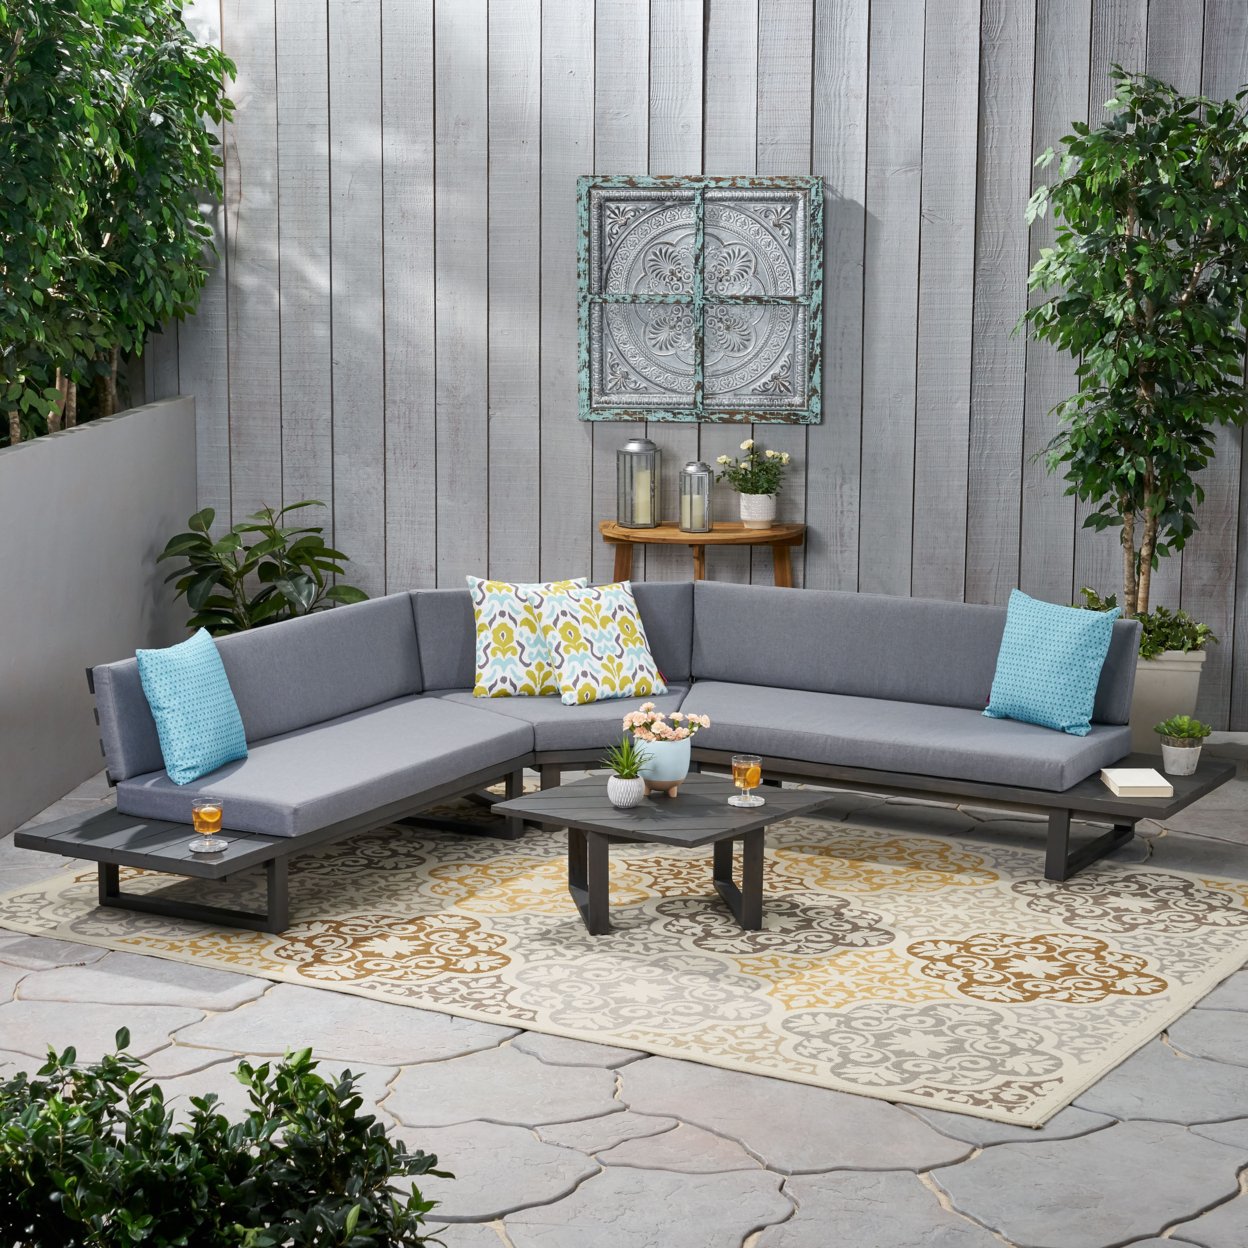 Aida Outdoor Acacia Wood 5 Seater Sectional Sofa Set With Water-Resistant Cushions - Dark Gray + Gray